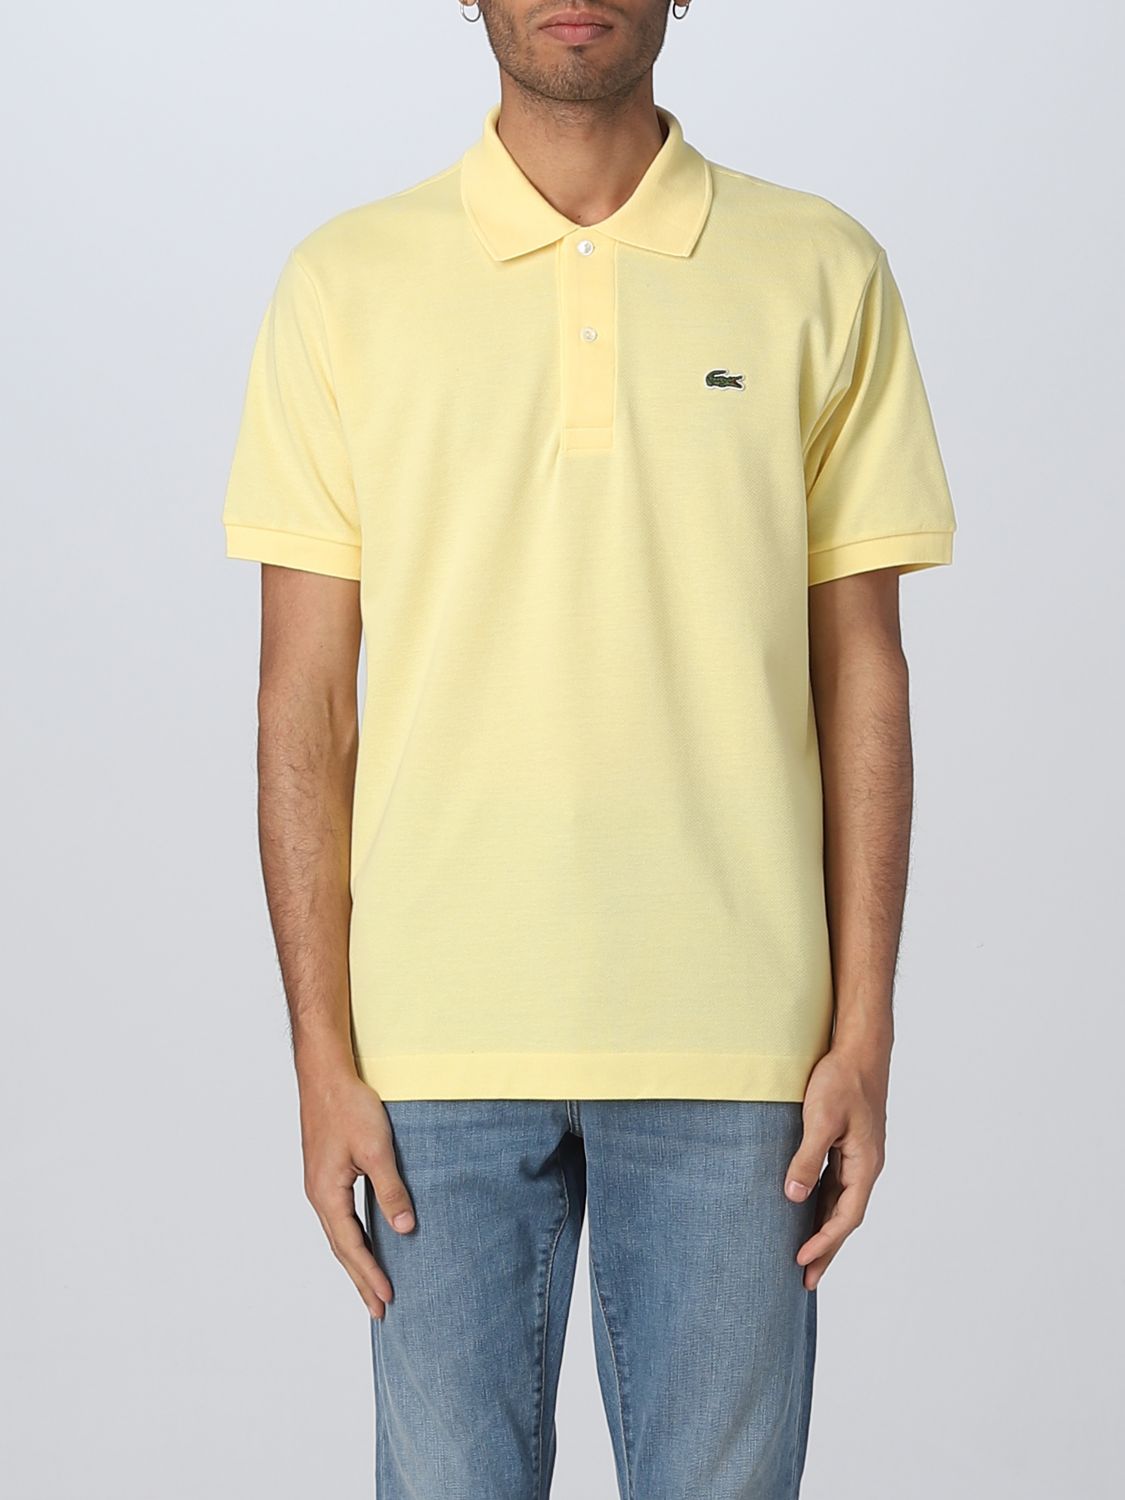 zoet Masaccio fluit LACOSTE: polo shirt for man - Yellow | Lacoste polo shirt L1212 online on  GIGLIO.COM